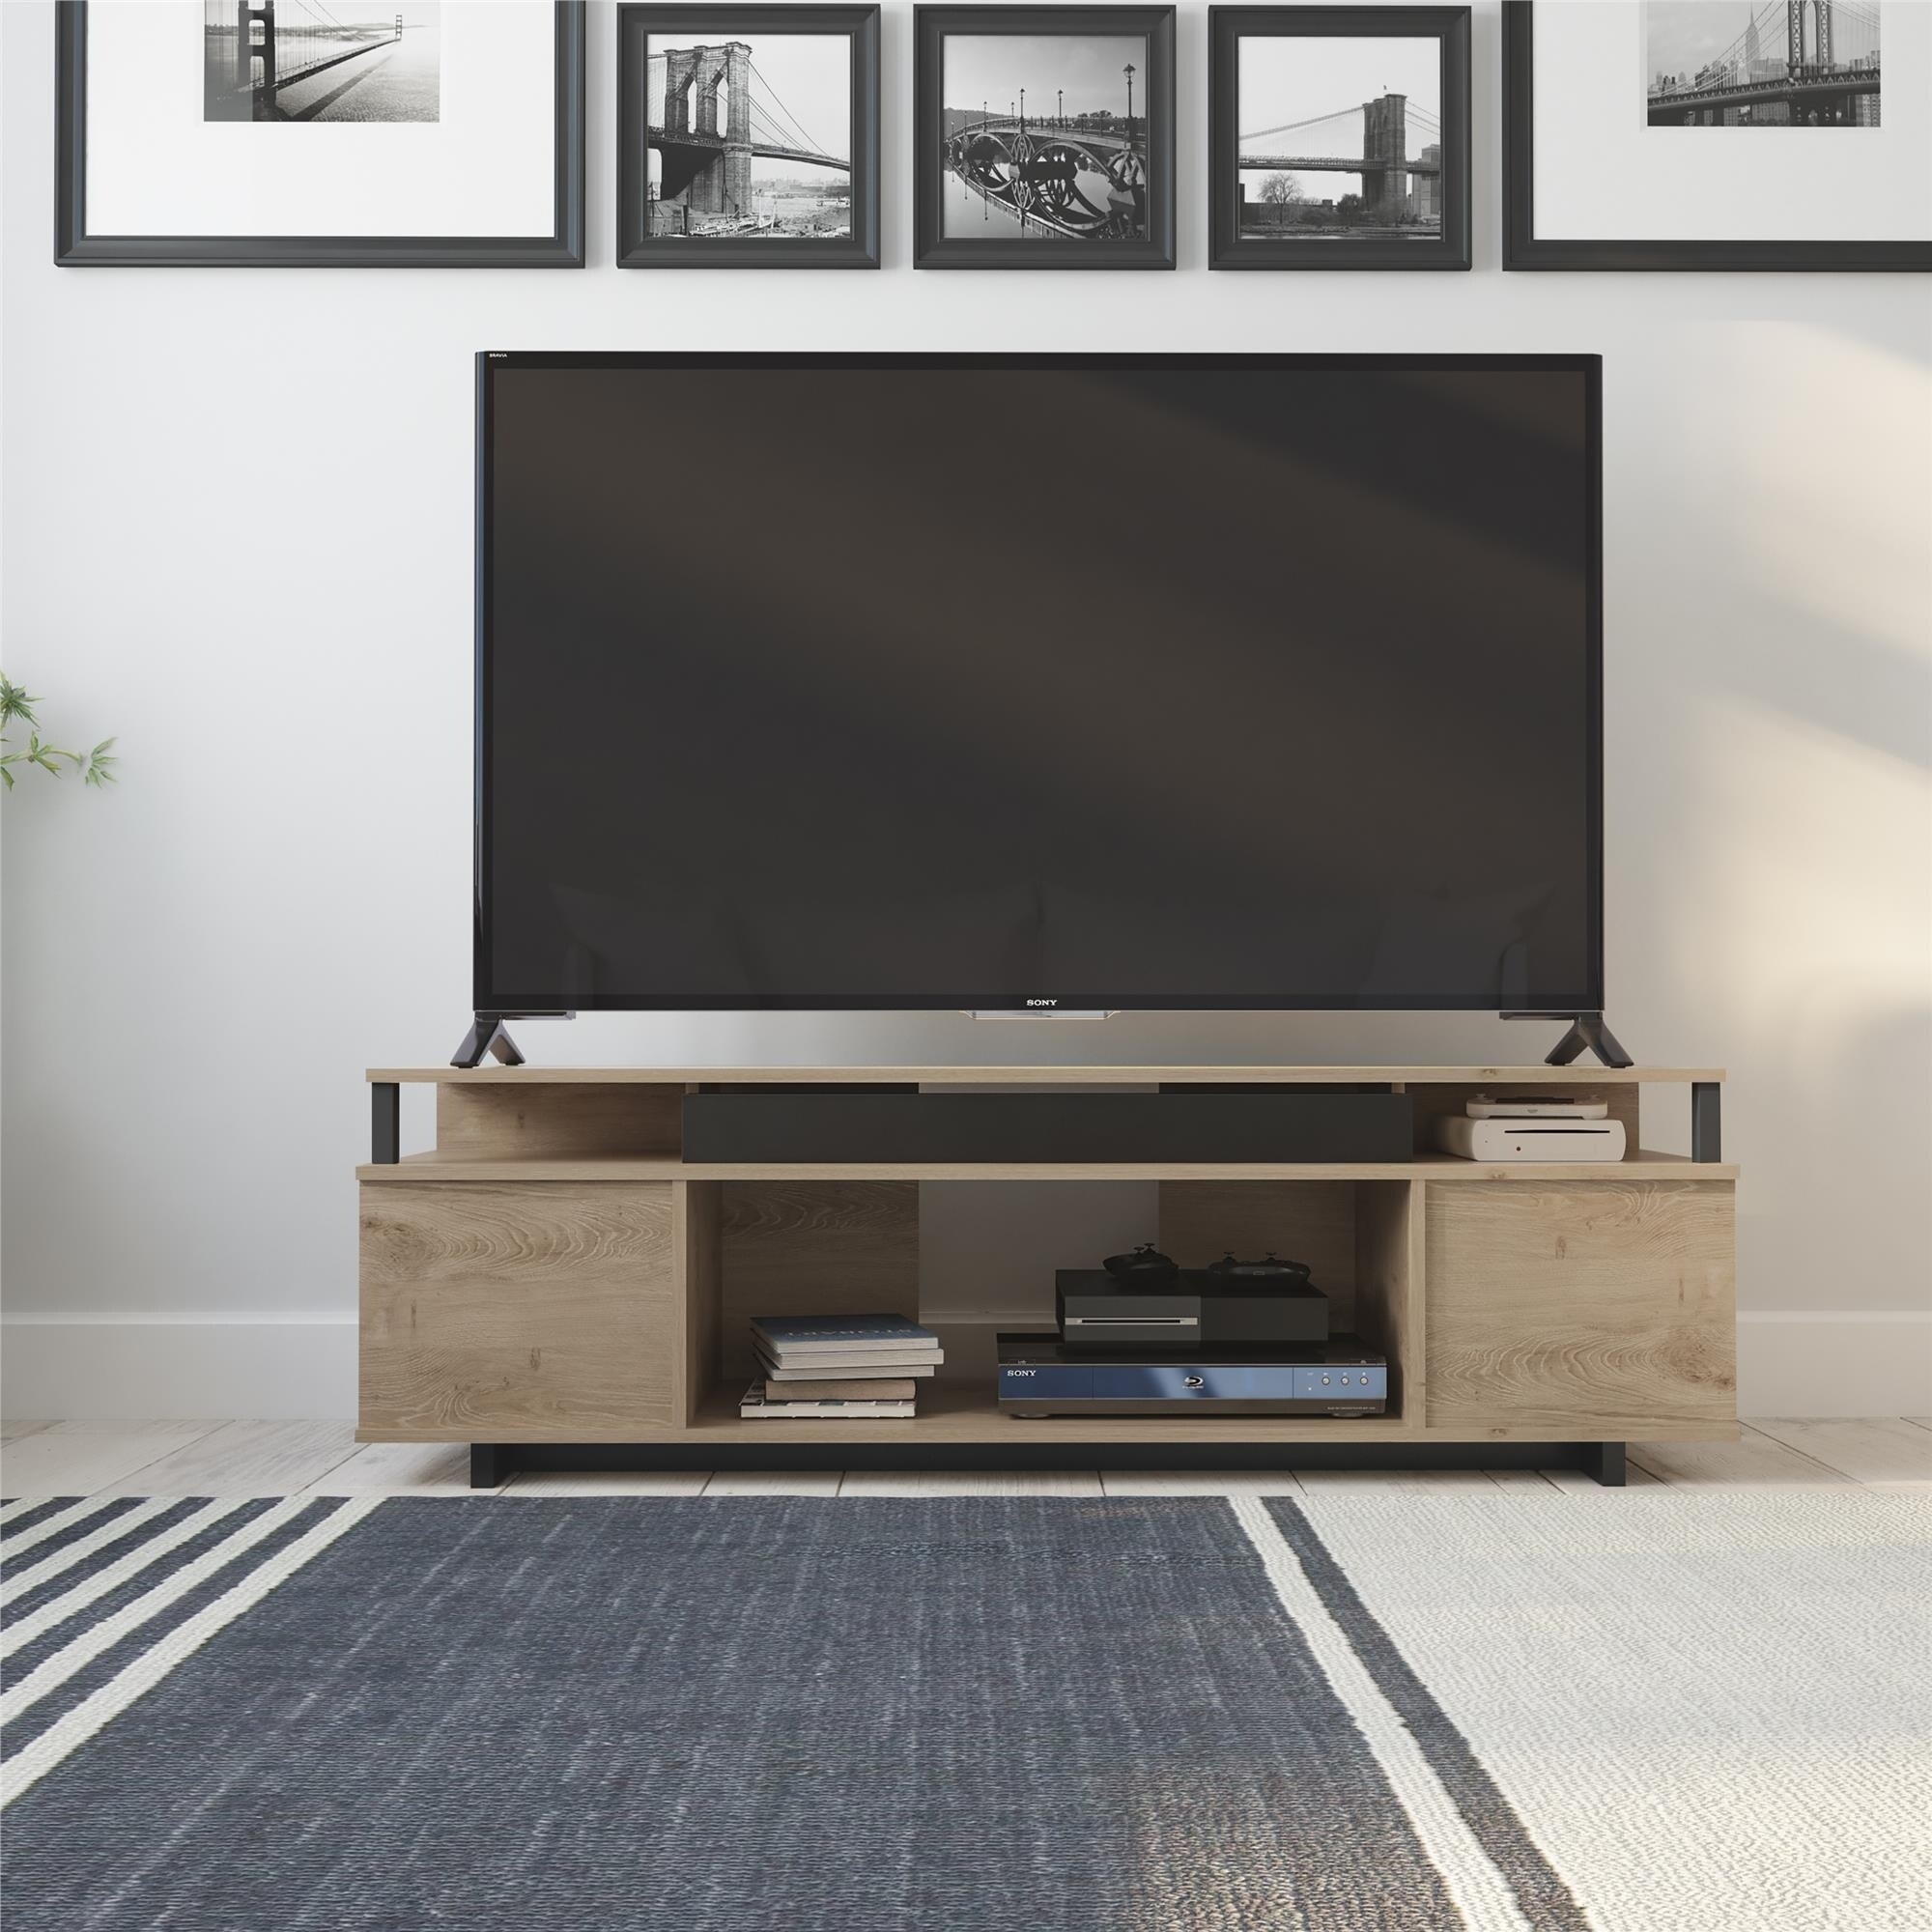 Shop Avenue Greene Naperville Tv Stand For Tvs Up To 65 Inch